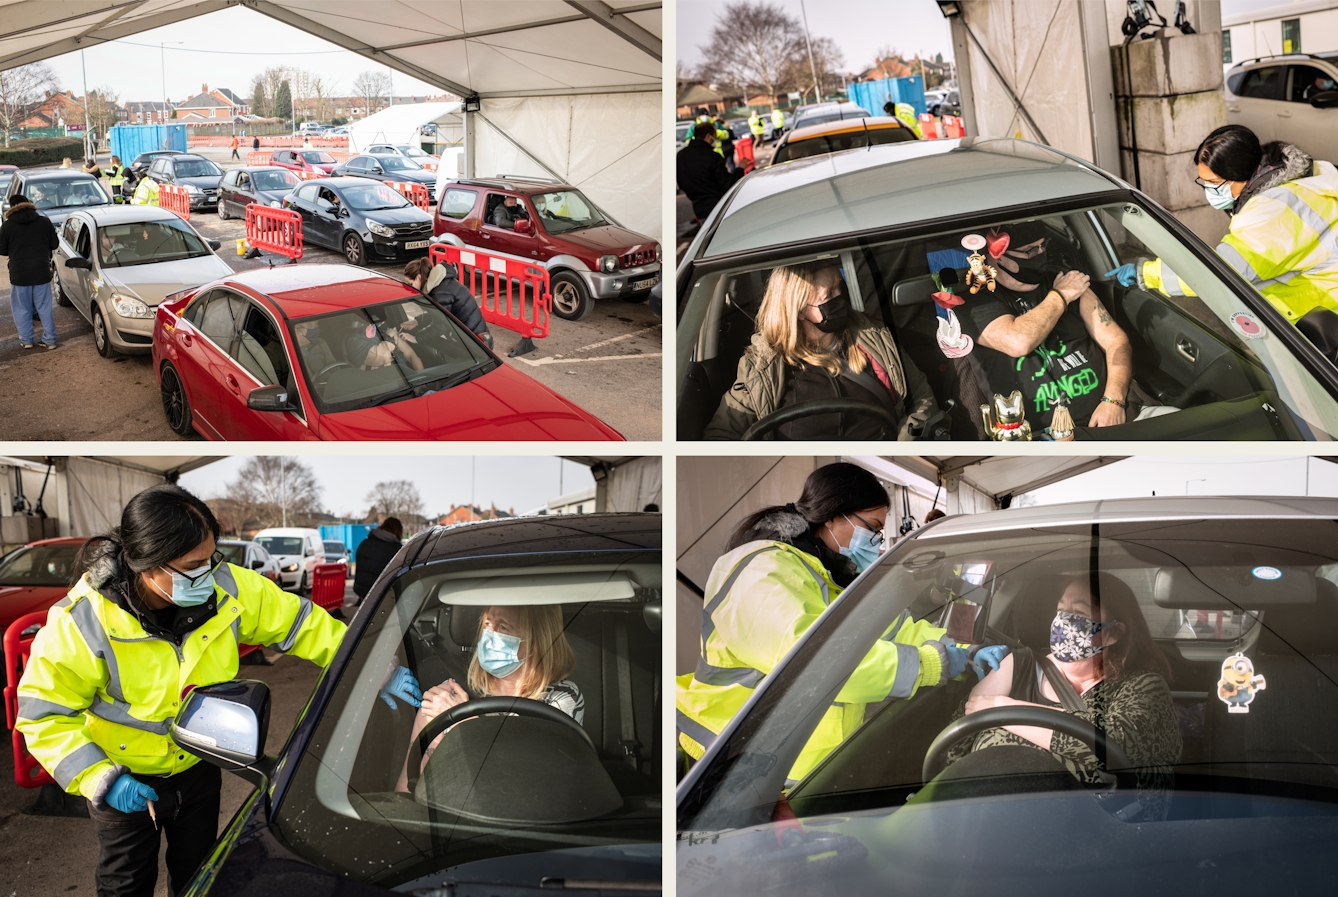 Grid of four photographs, two by two. Each image shows the scene of a drive-through vaccination centre. There are queuing cars waiting for the occupants' turn to received the vaccine. There are views through peoples' windscreens as they pull up their sleeve to receive the jab. A woman in a hi-viz jacket, blue latex gloves and a face covering works through the car side windows to administer the vaccine to the people inside the car.